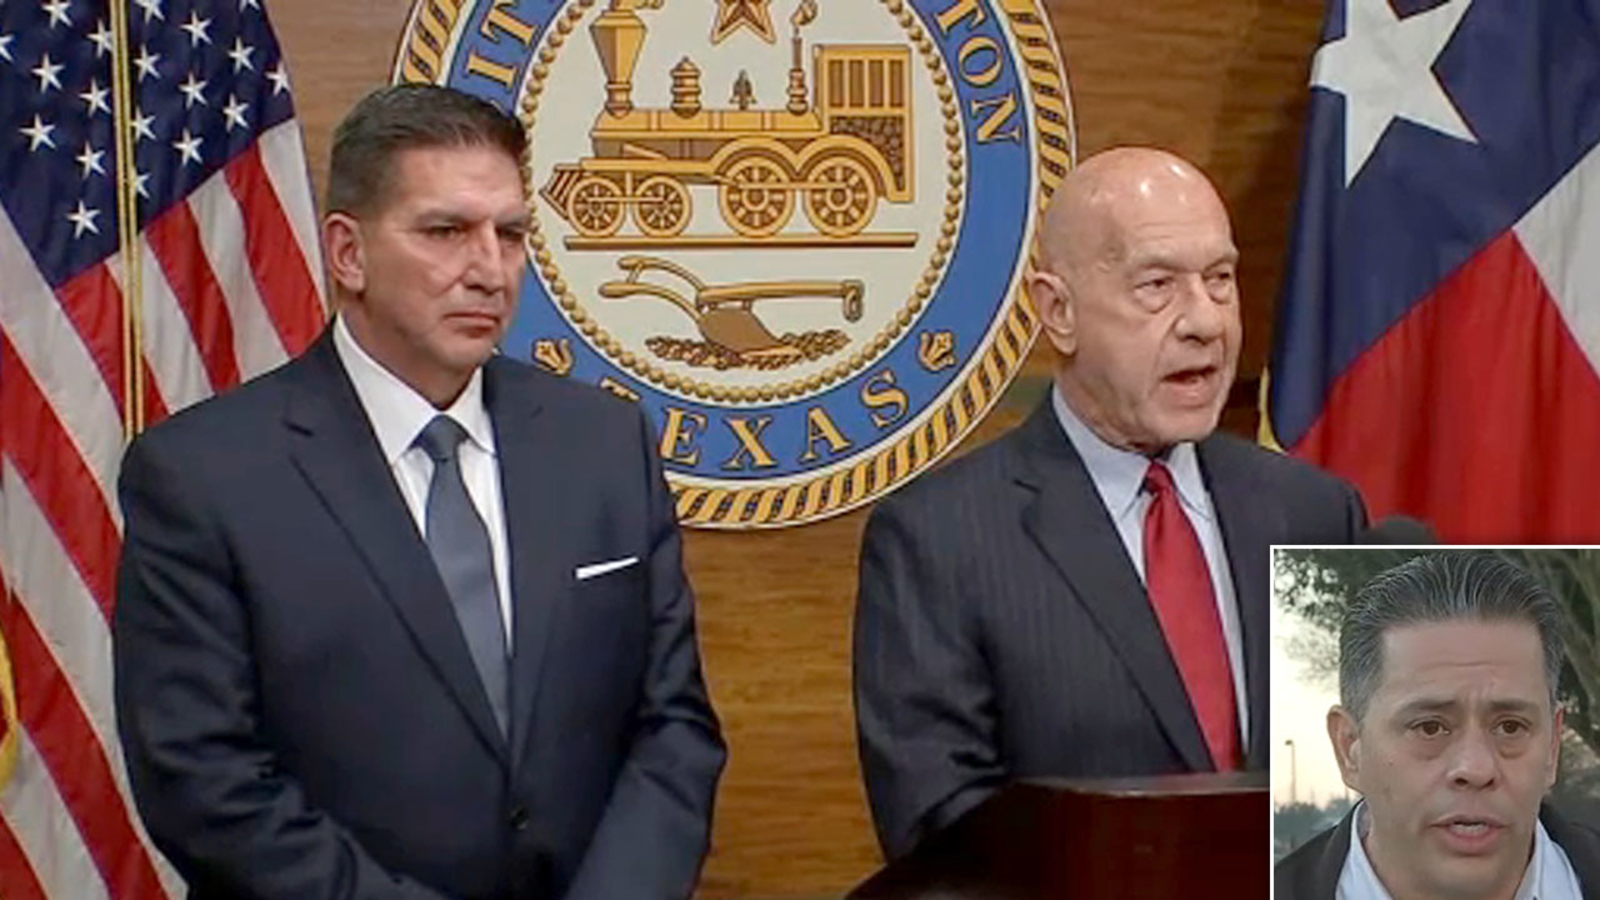 Houston Fire Chief Samuel Pea out, Office of Emergency Management Director Thomas Muoz in, Mayor Whitmire announces [Video]